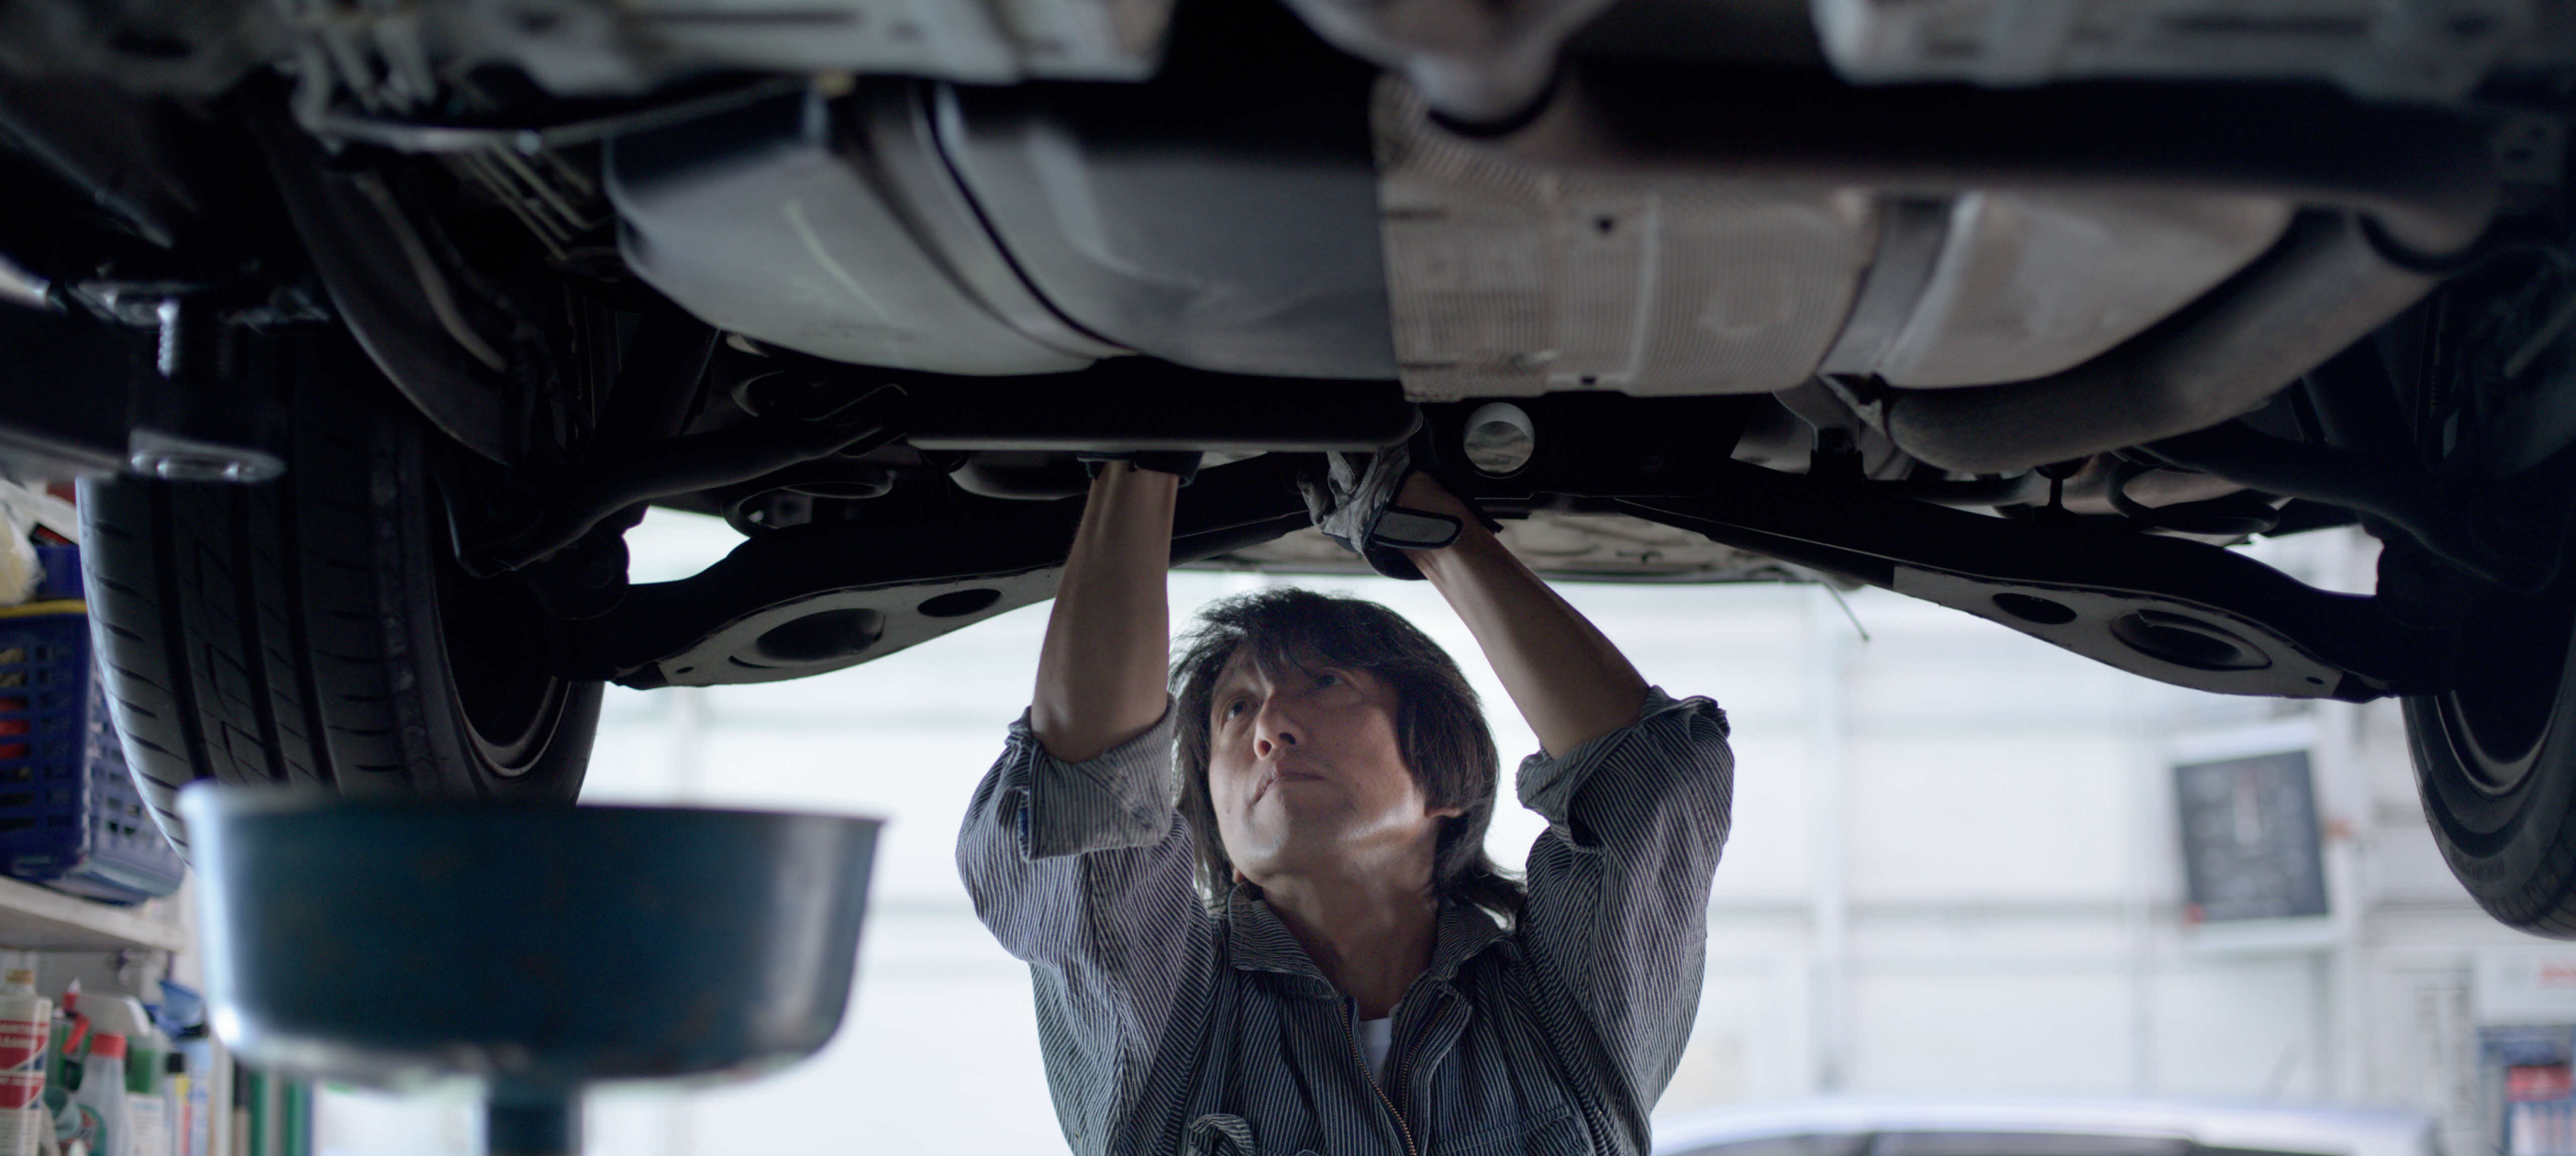 Ease your mind with regular car servicing